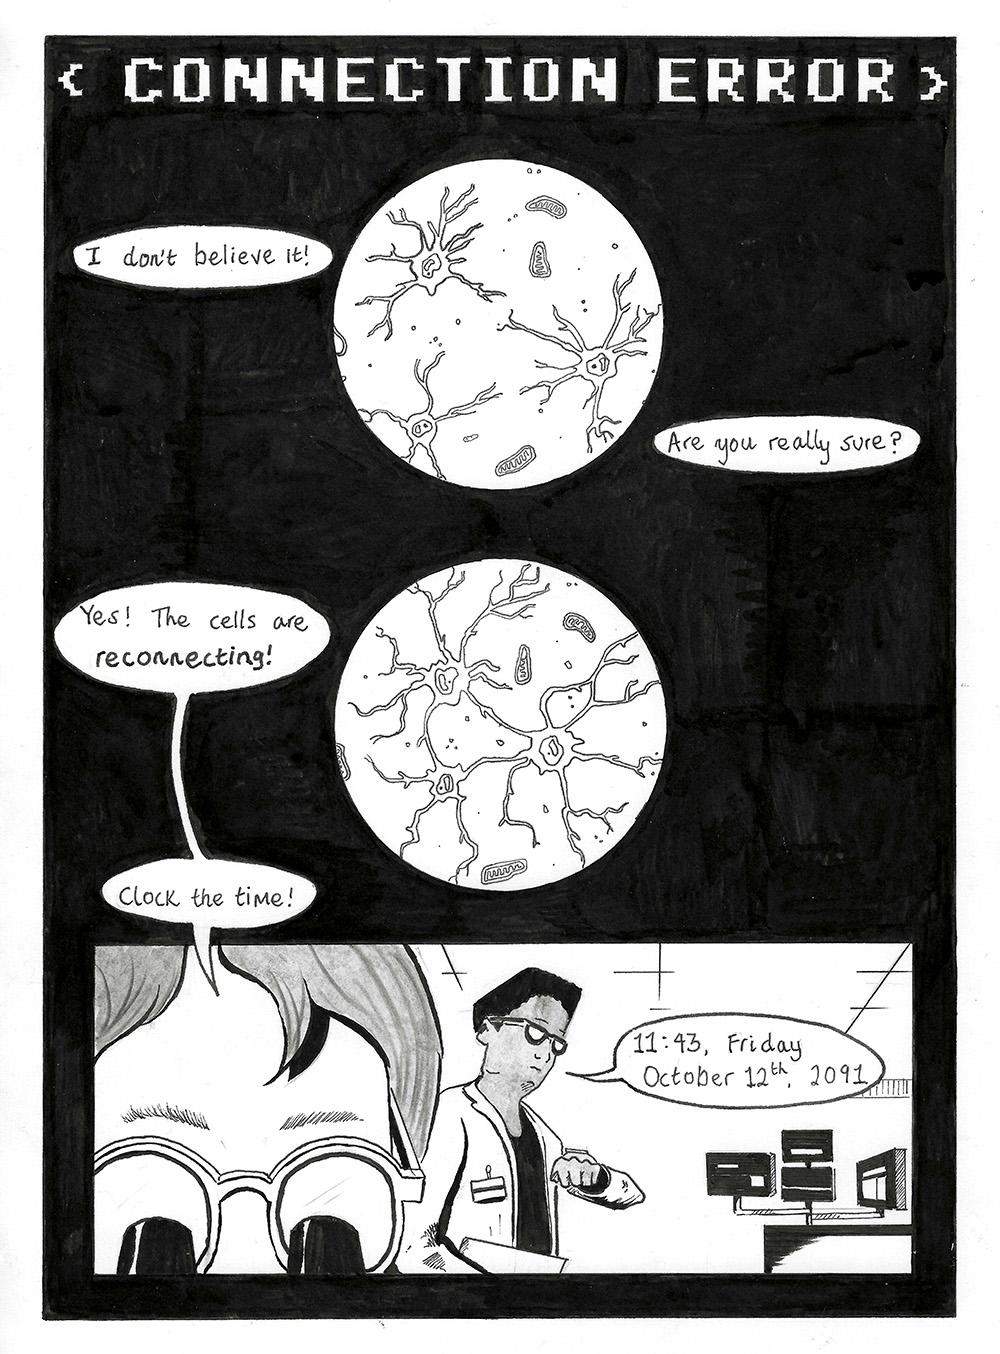 Page 1 of Connection Error, a black and white comic by Adam Westbrook